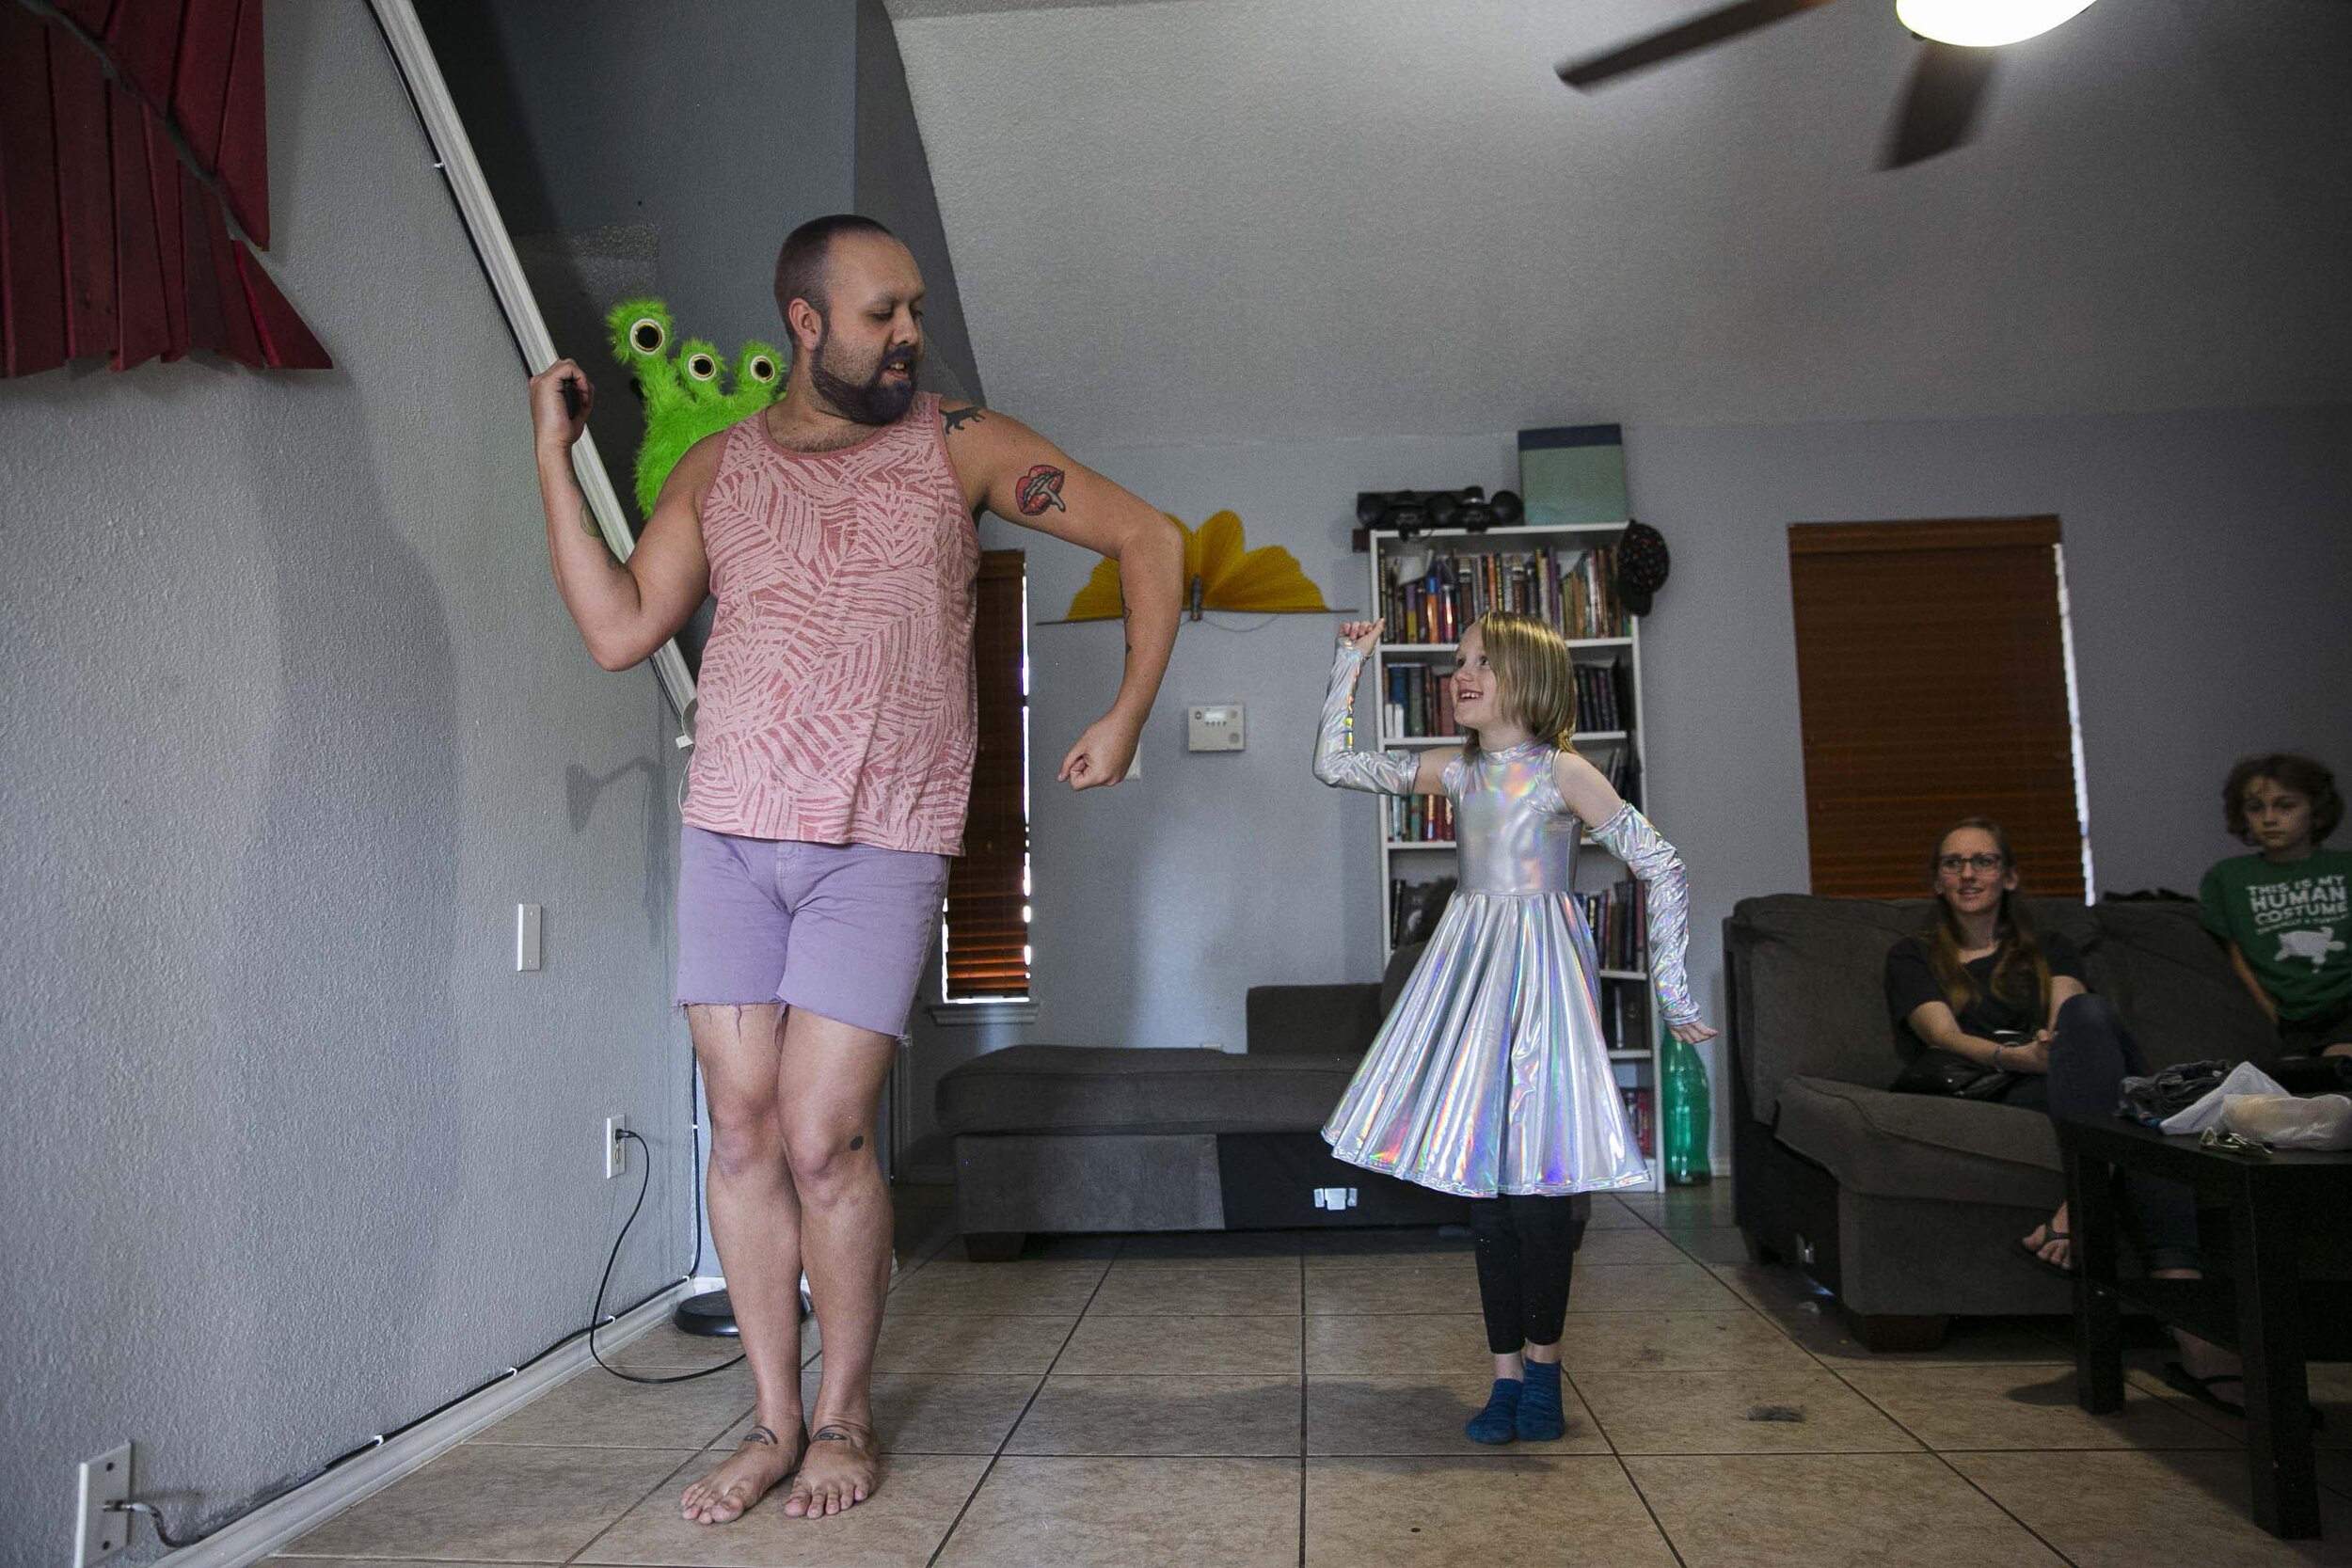  Under the mentorship of the drag queens, Keegan’s drag life has blossomed.  Robby, a drag queen, then 25, left, helps Keegan, a gender creative child, then 8, middle, rehearse for his upcoming inaugural drag performance at the home Robby shares with